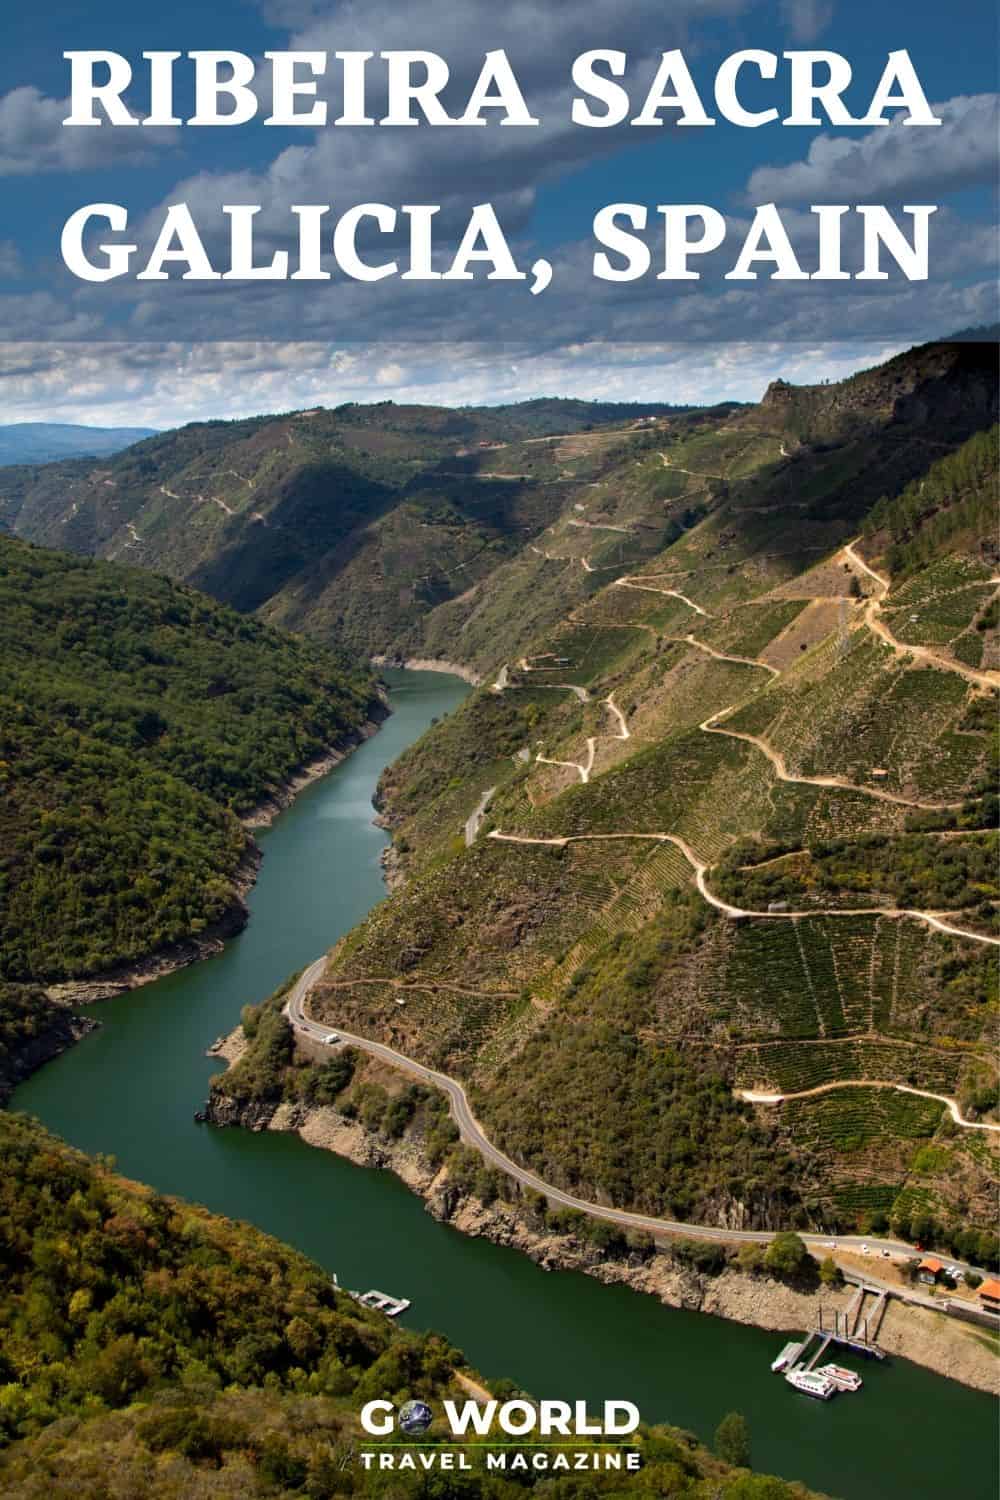 The Ribeira Sacra in Galicia is full of natural beauty where you can taste delicious wine, visit old monasteries and visit the Sil Canyons. #Galiciaspain #Spaintravel